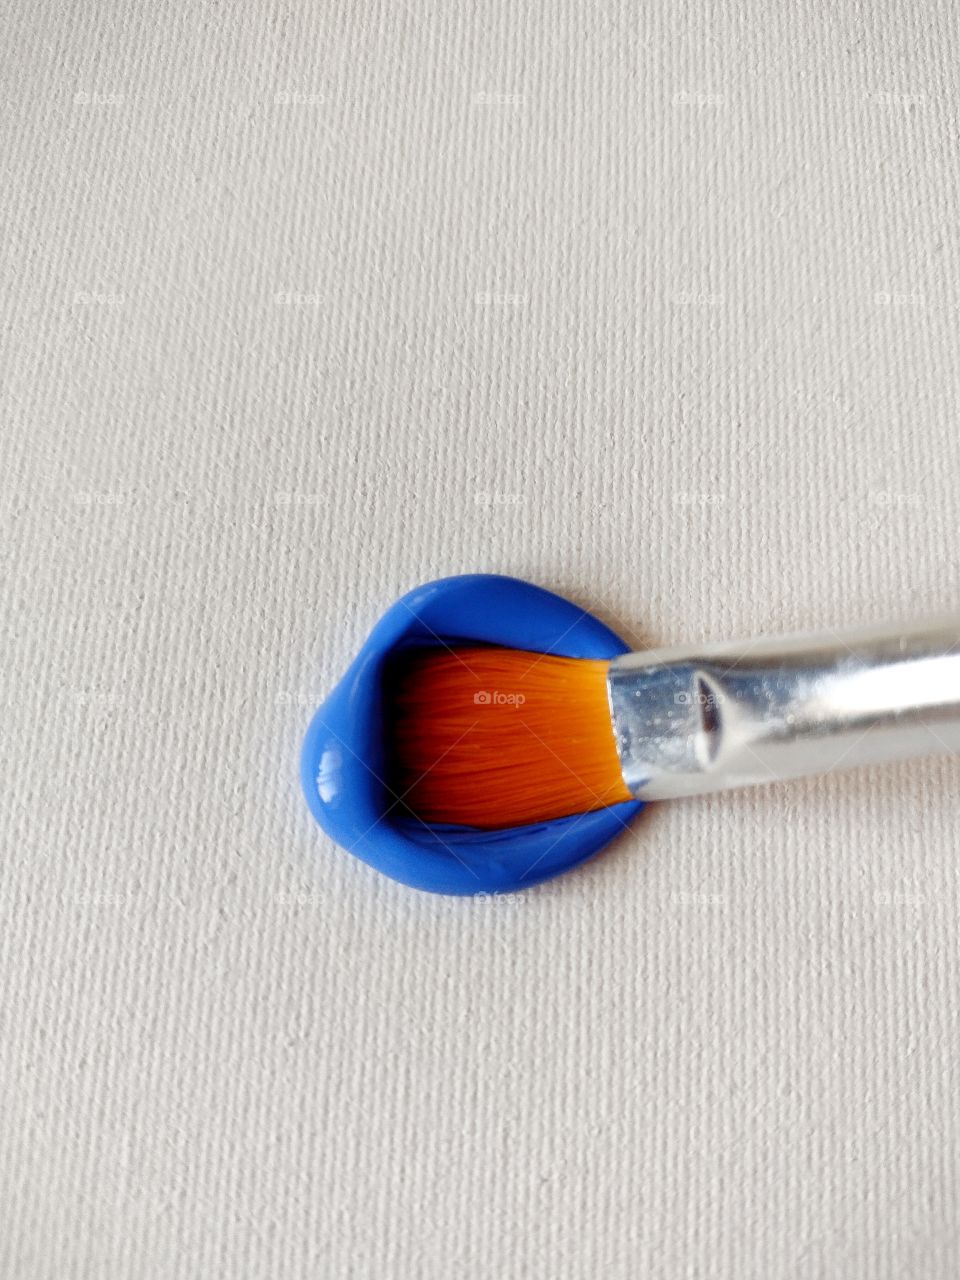 Unfiltered, beautiful, lovely close-up of blue paint and a paint brush